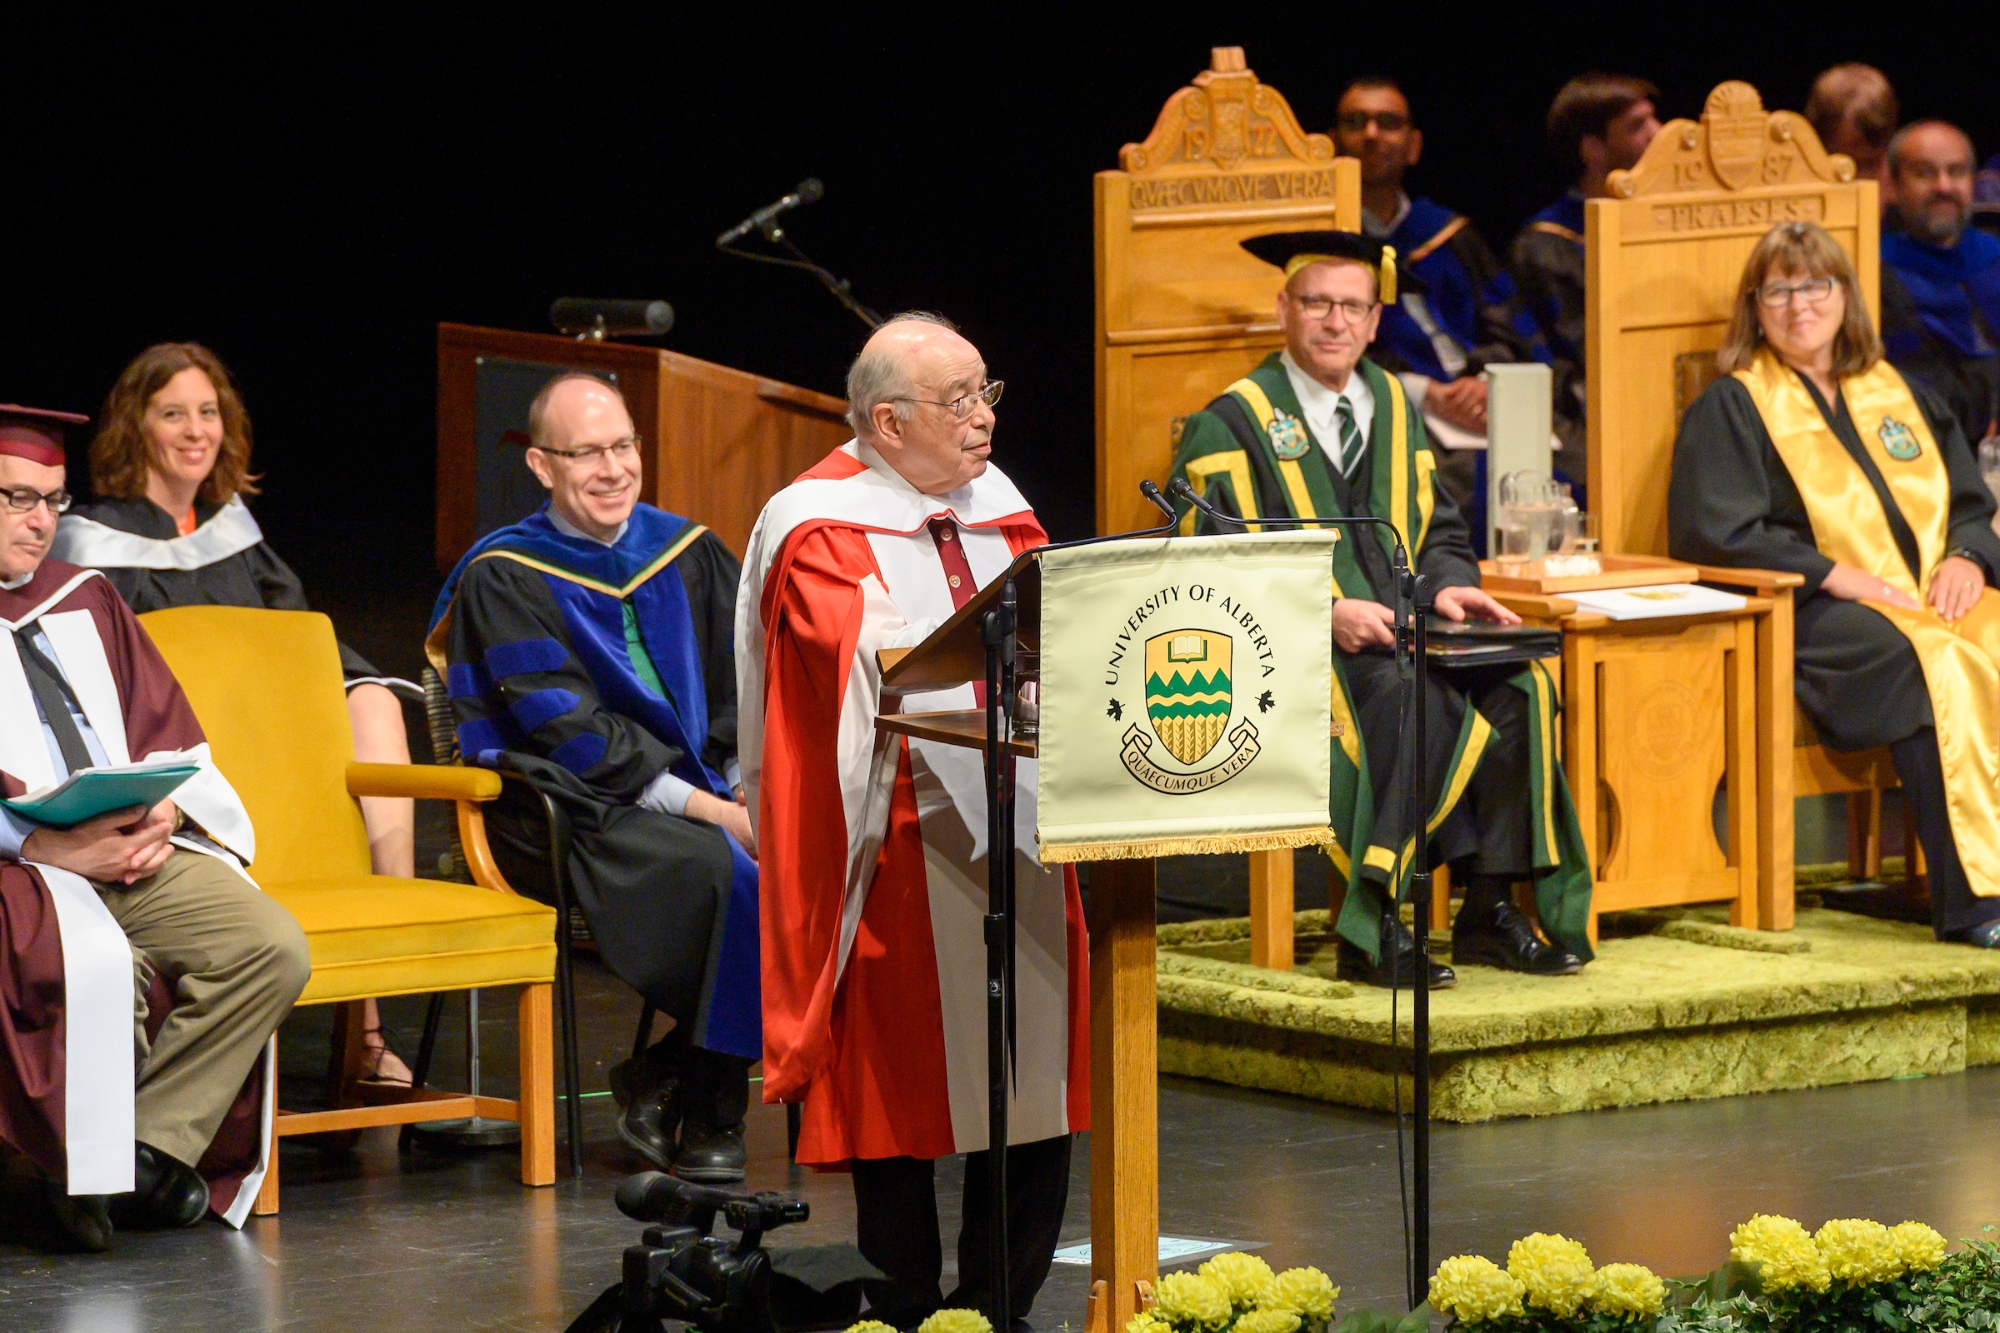 Cyril Kay, honorary doctor of science